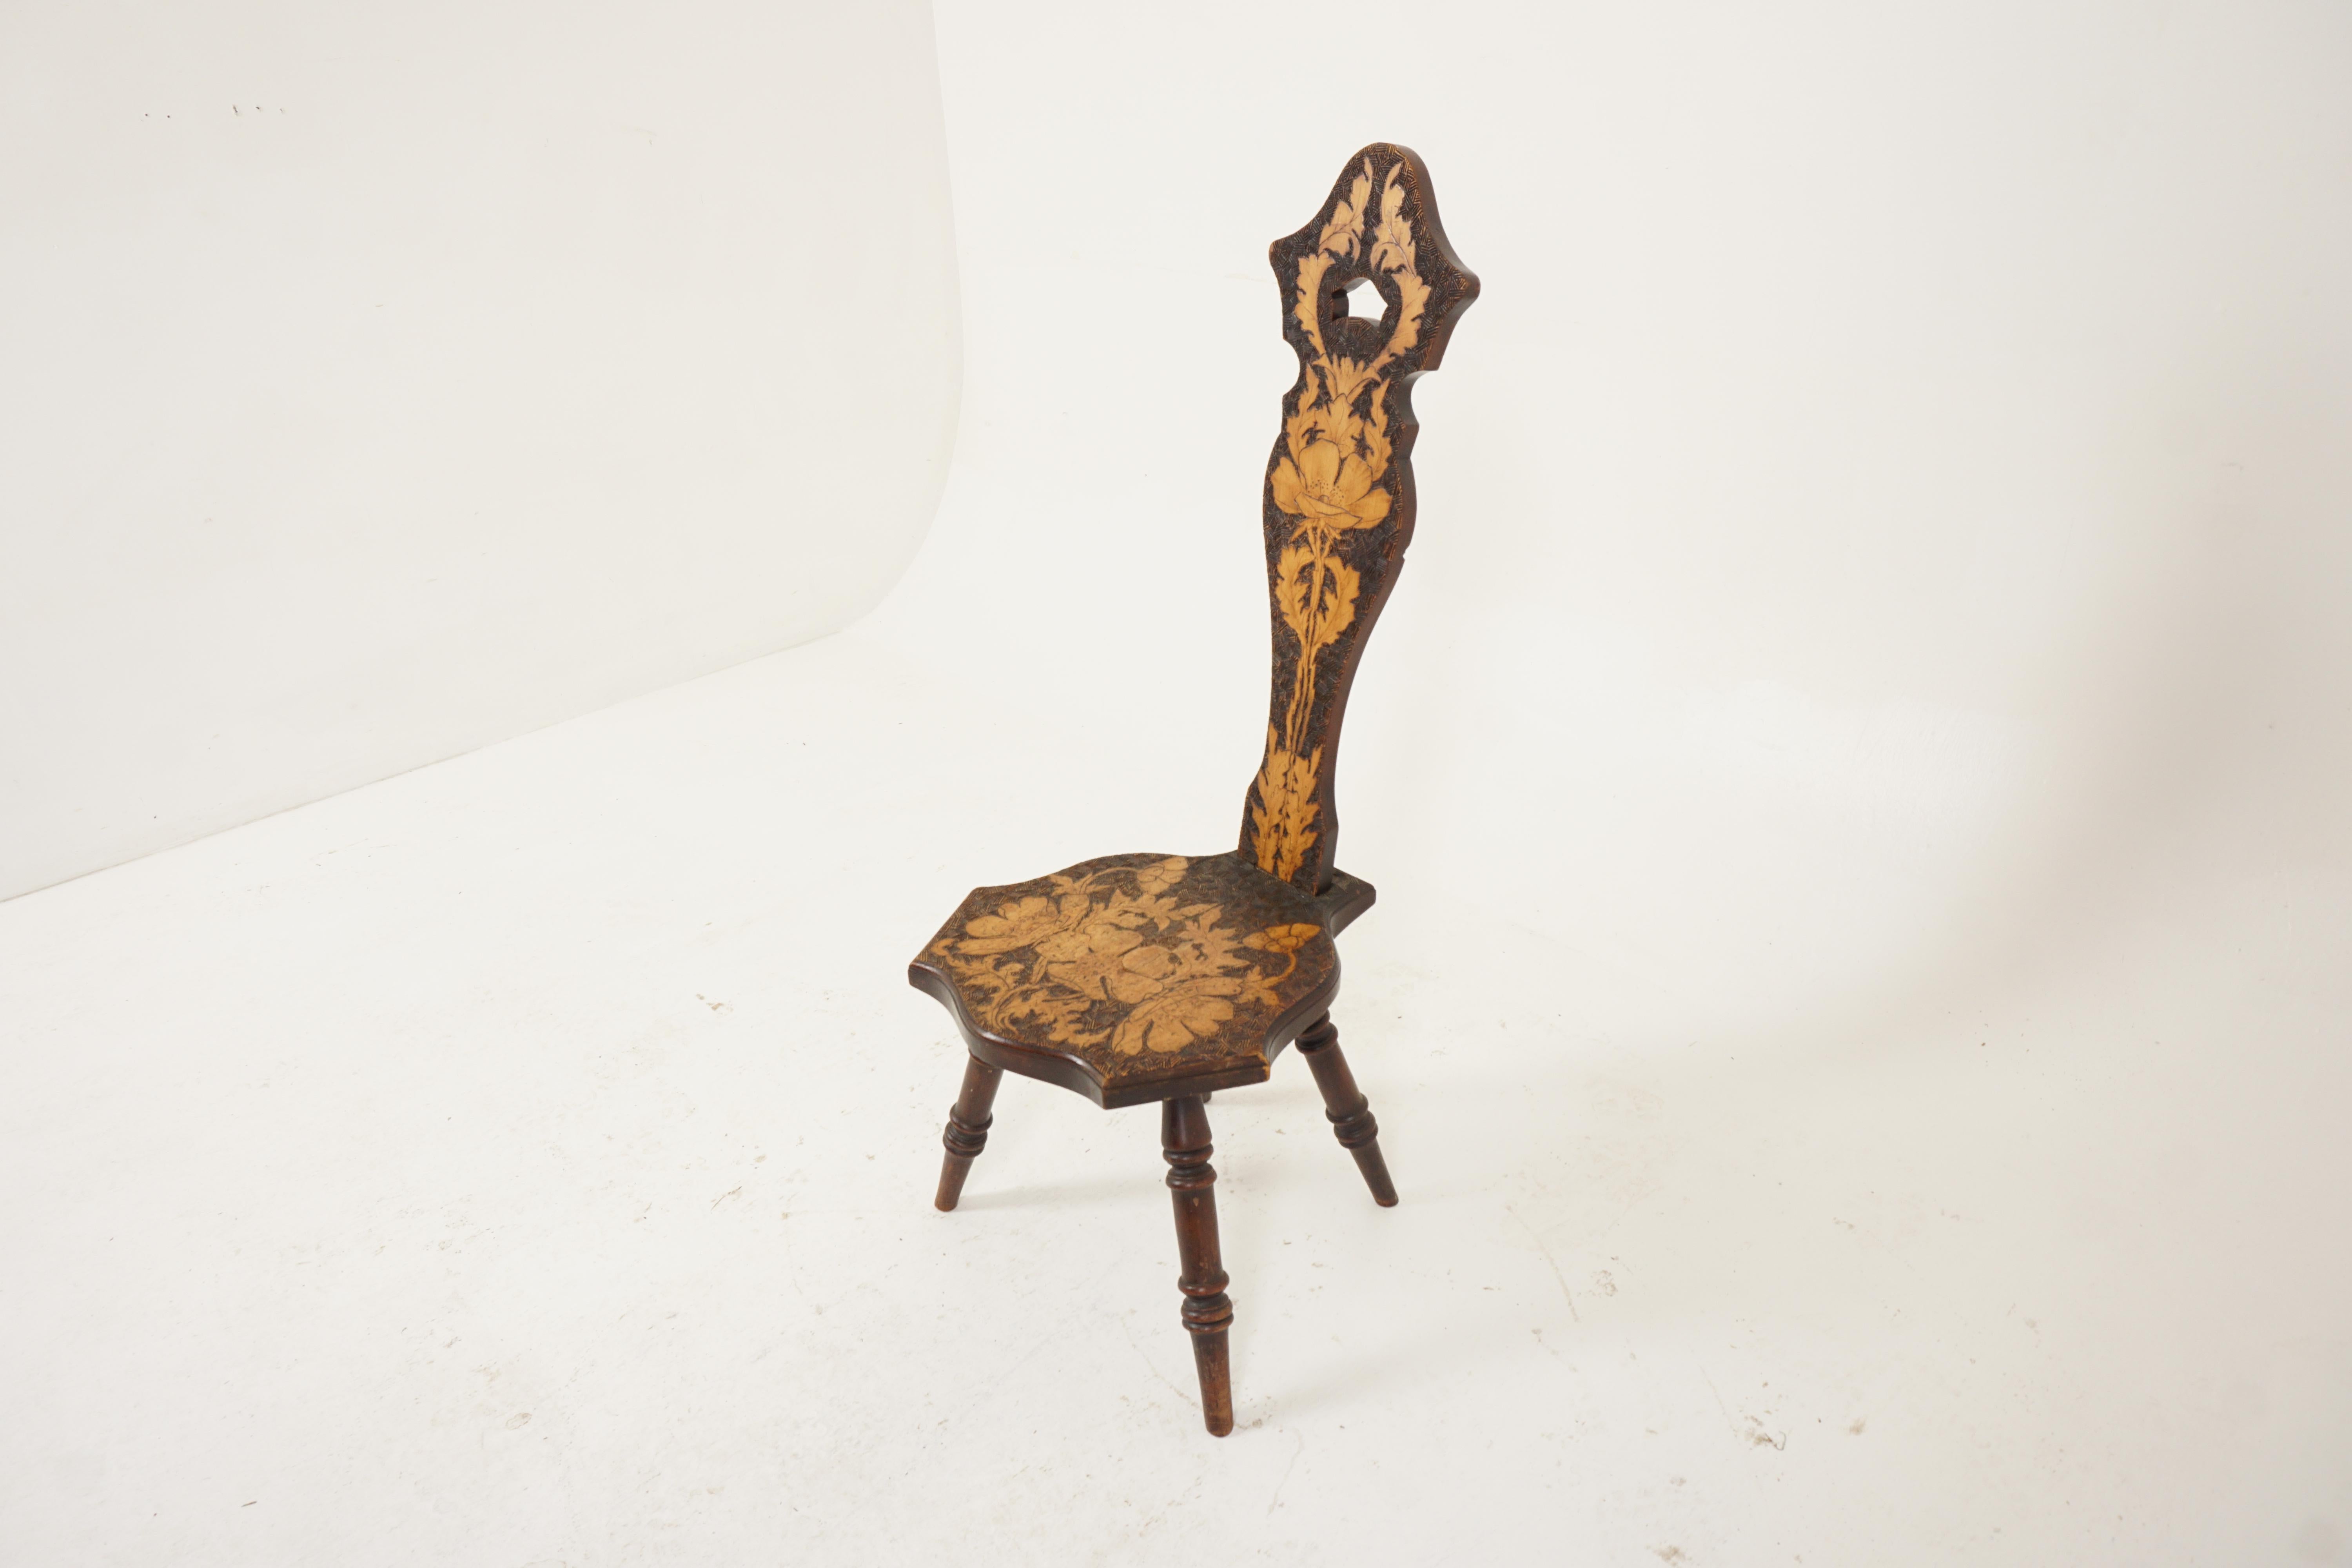 Antique Victorian carved spinning chair, Poker Work, Scotland 1880, H272

Scotland 1880
Beechwood
Original finish
High back with cut out near top
With floral design to the back and the shaped seat all standing on four turned legs
Very decorative and